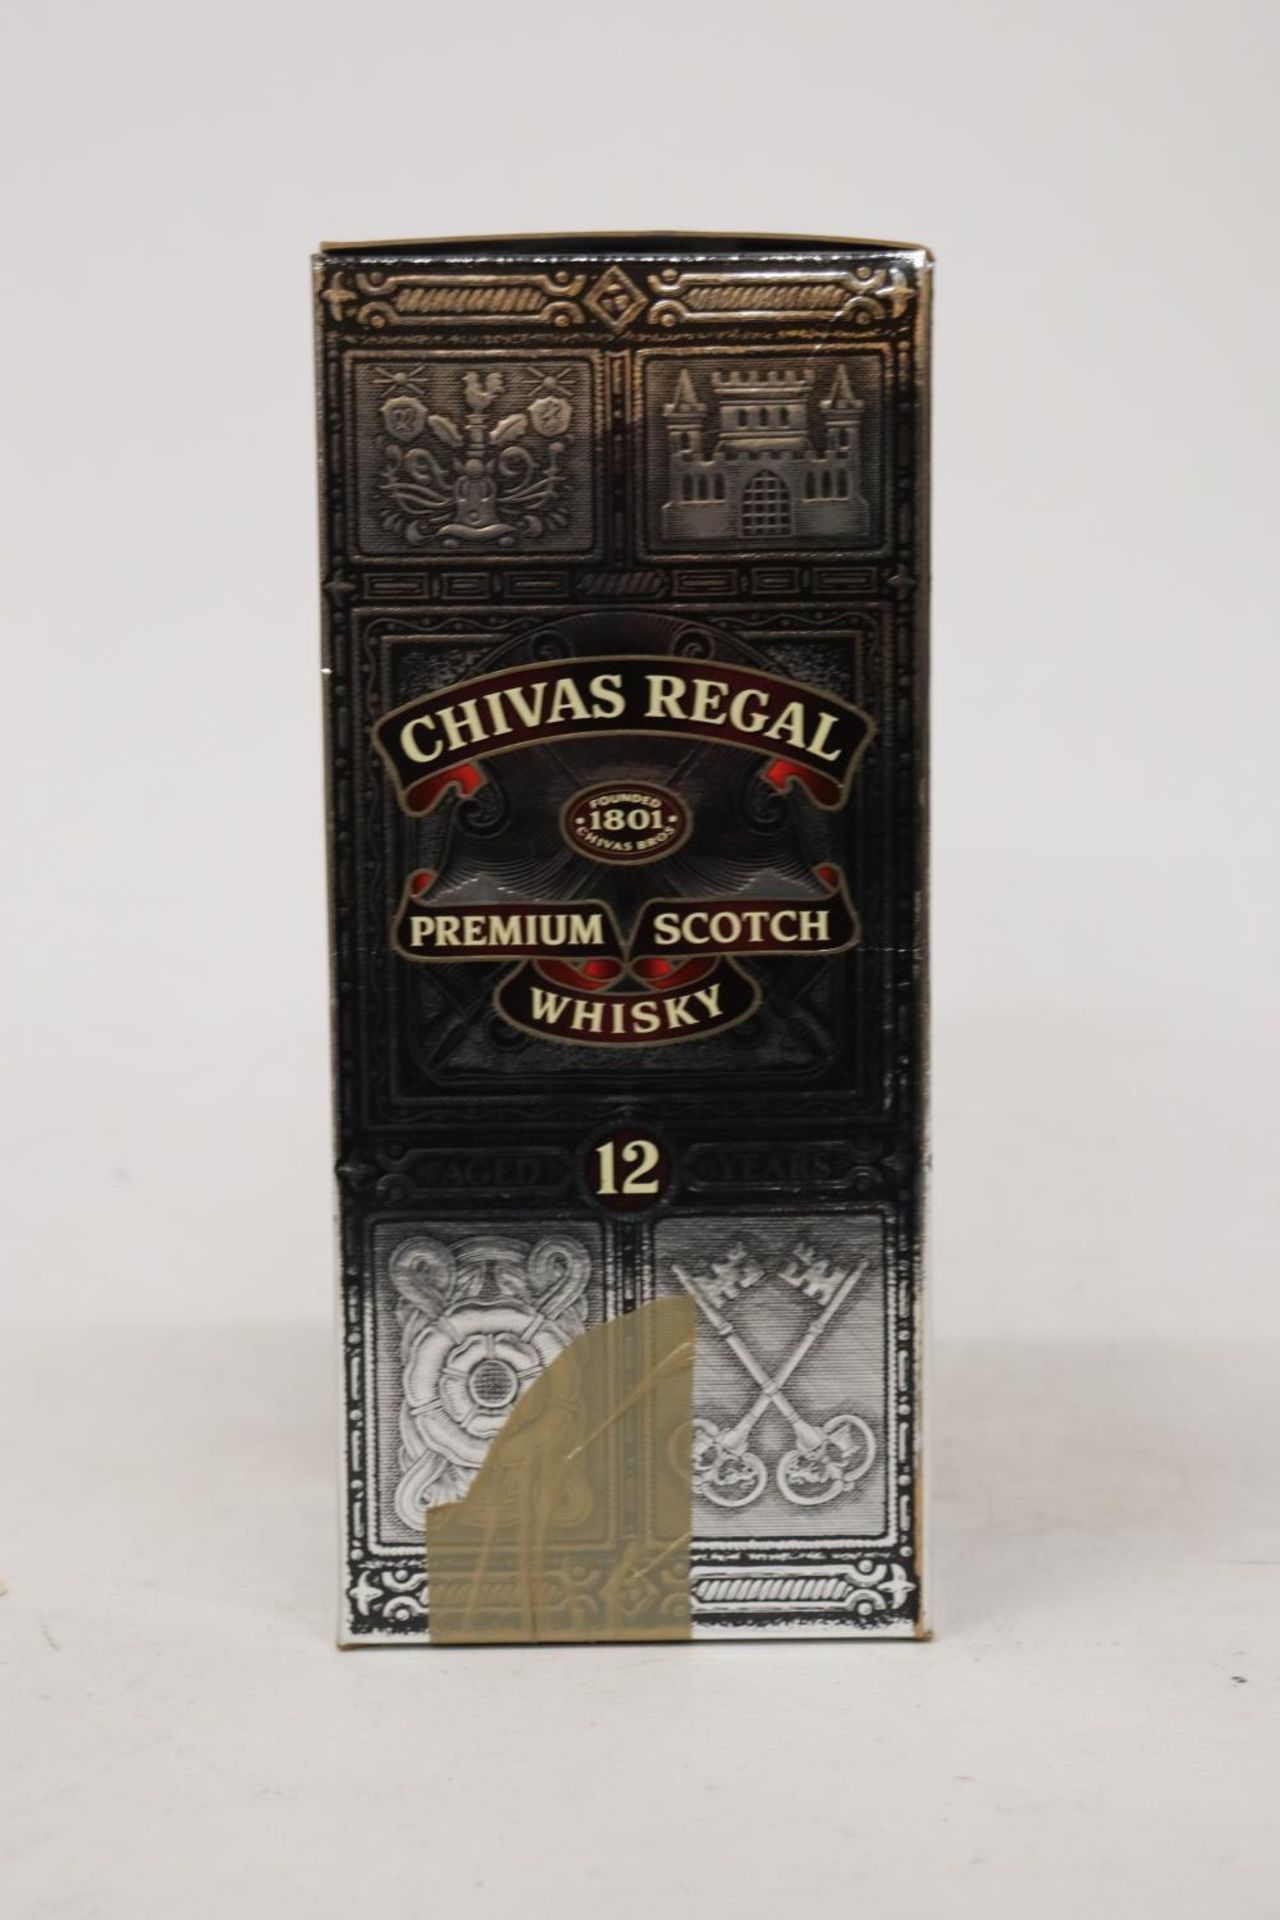 A BOTTLE OF CHIVAS REGAL 12 YEAR OLD WHISKY, BOXED - Image 4 of 5